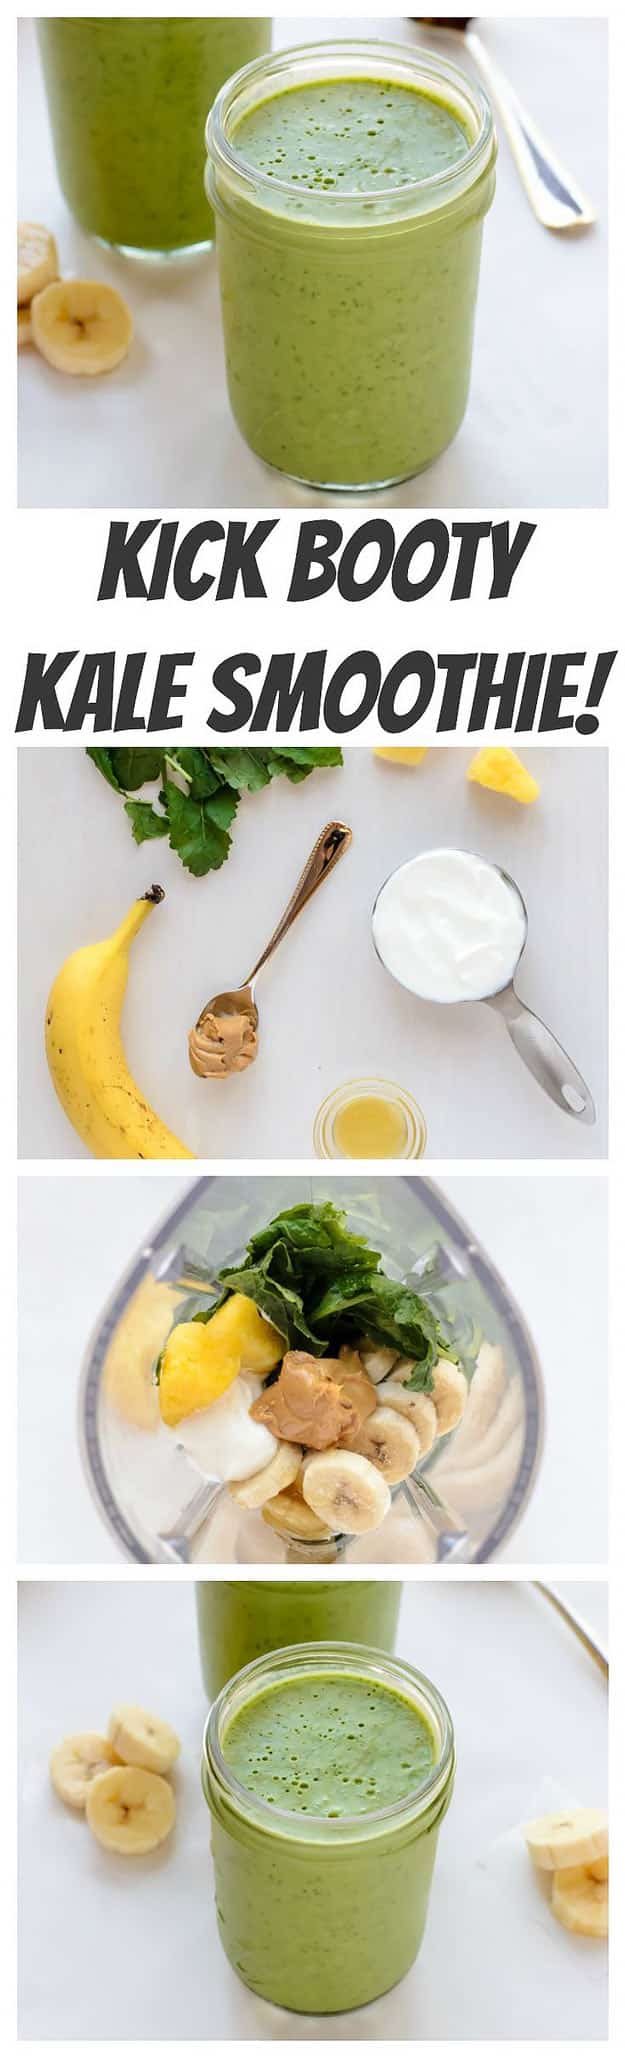 Healthy smoothie recipes and easy ideas perfect for breakfast, energy. Low calorie and high protein recipes for weightloss and to lose weight. Simple homemade recipe ideas that kids love. | Kick Booty Kale Smoothie #smoothies #recipess